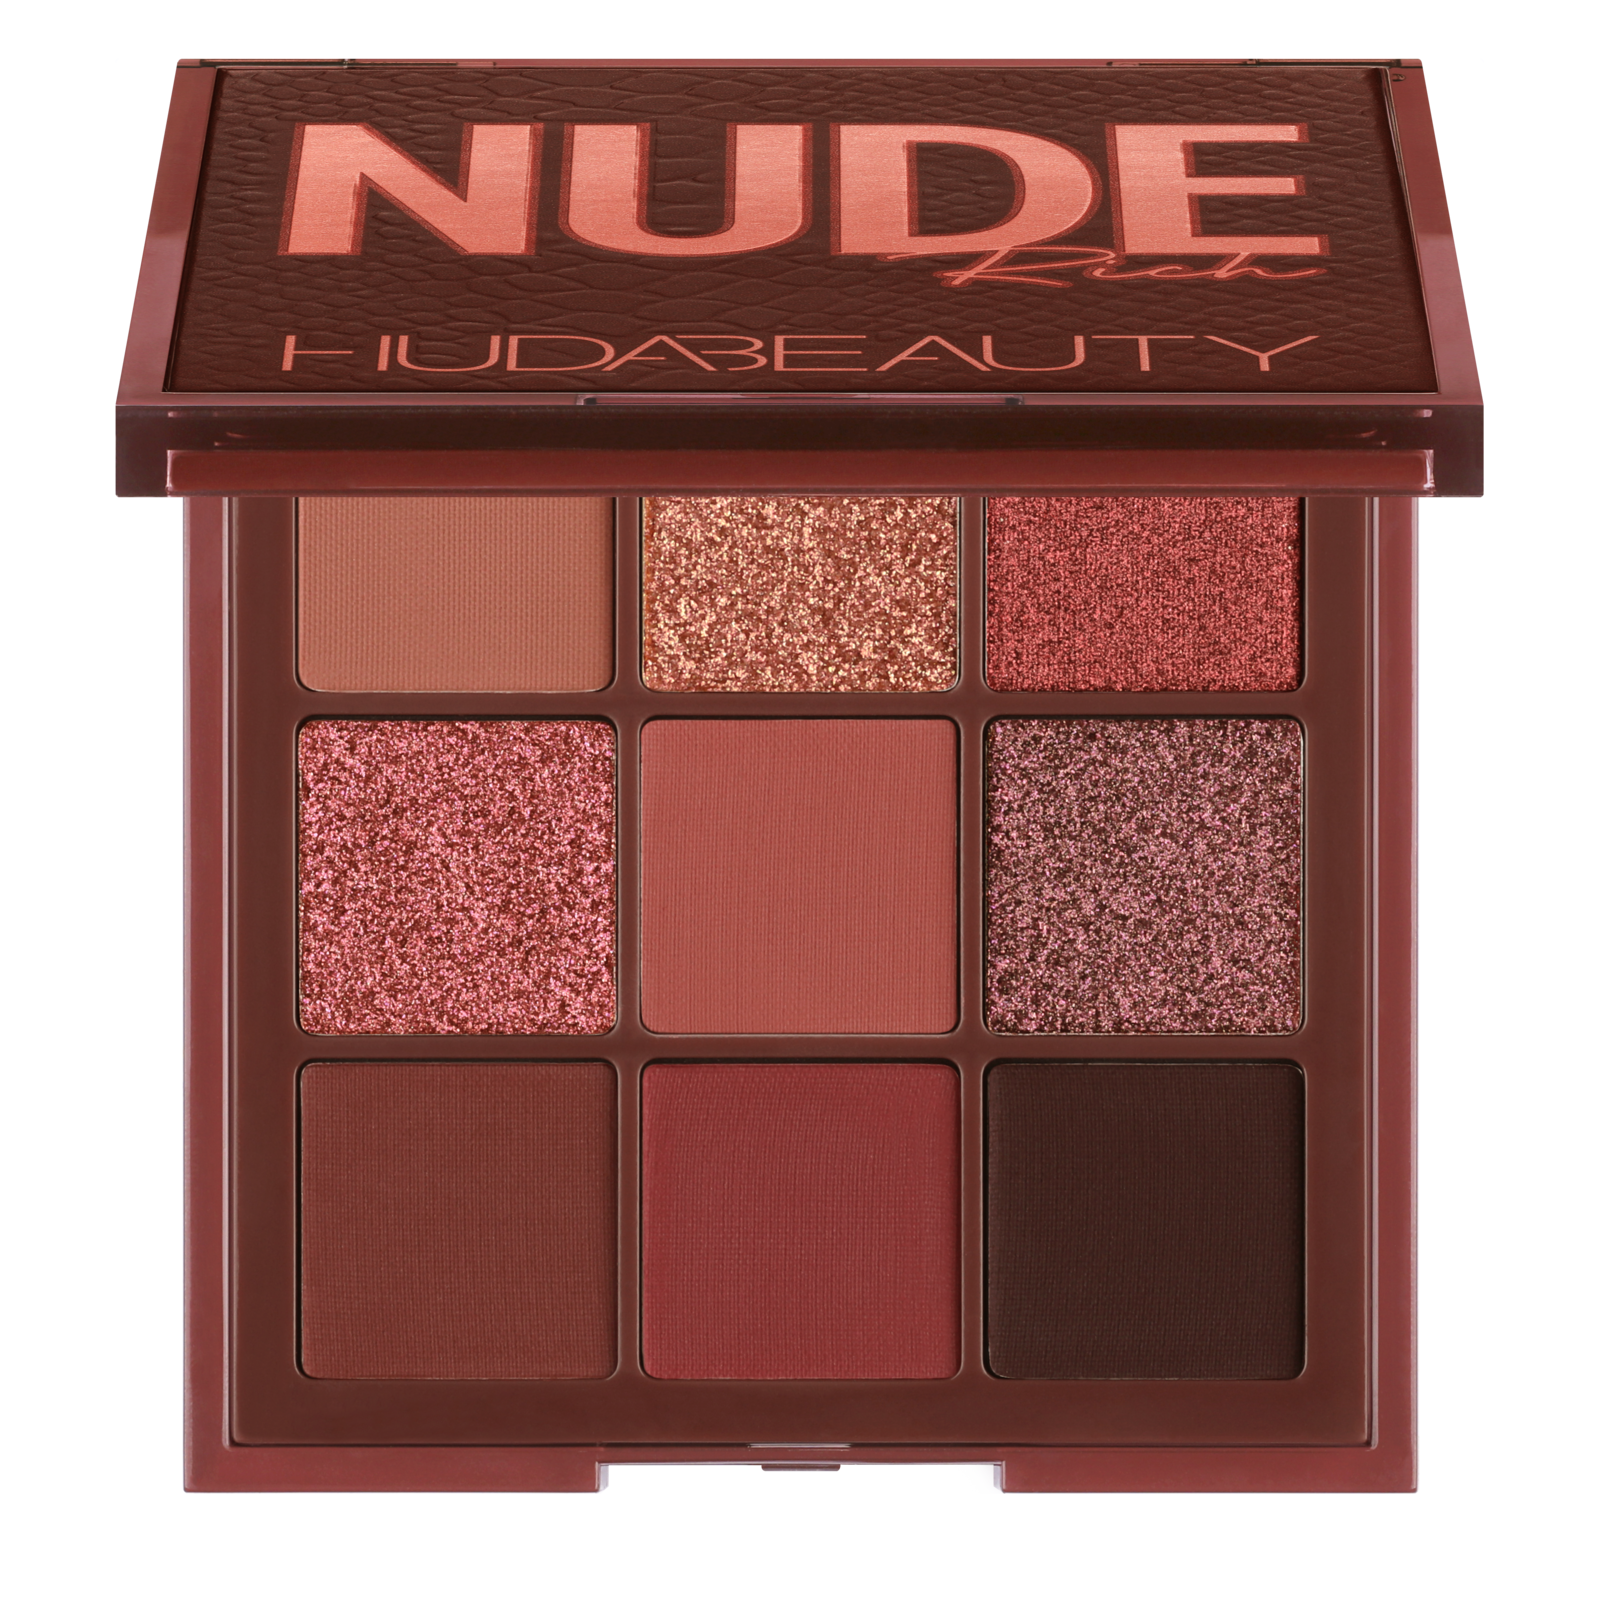 Huda Beauty - Rich Nude Obsessions Eyeshadow Palette